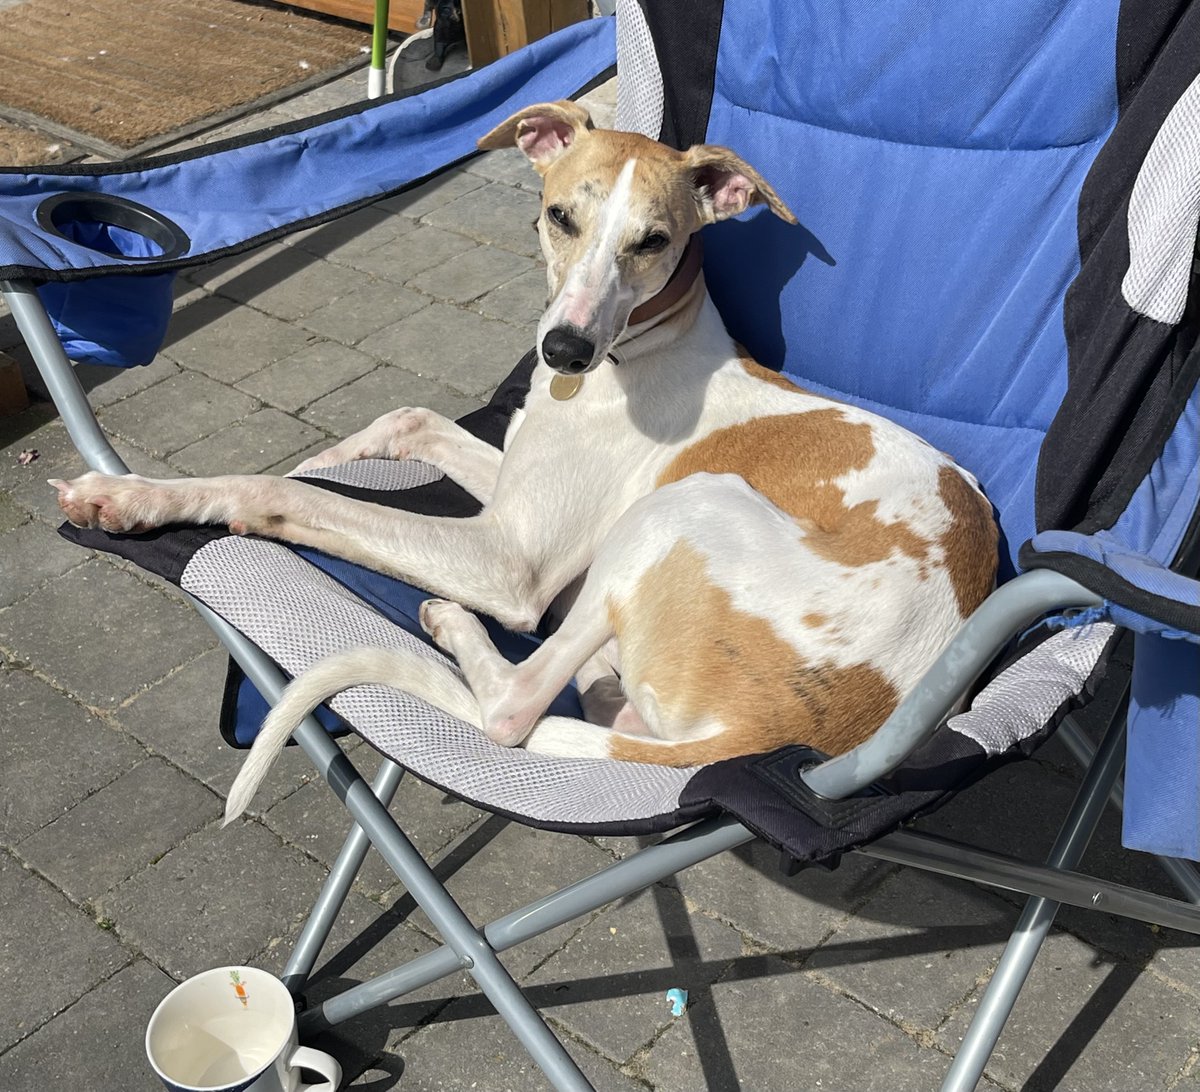 If you leave your chair in this place, expect to have it taken immediately… Wilfred - 😃😃😂😂😎😎 thanks mum xxx